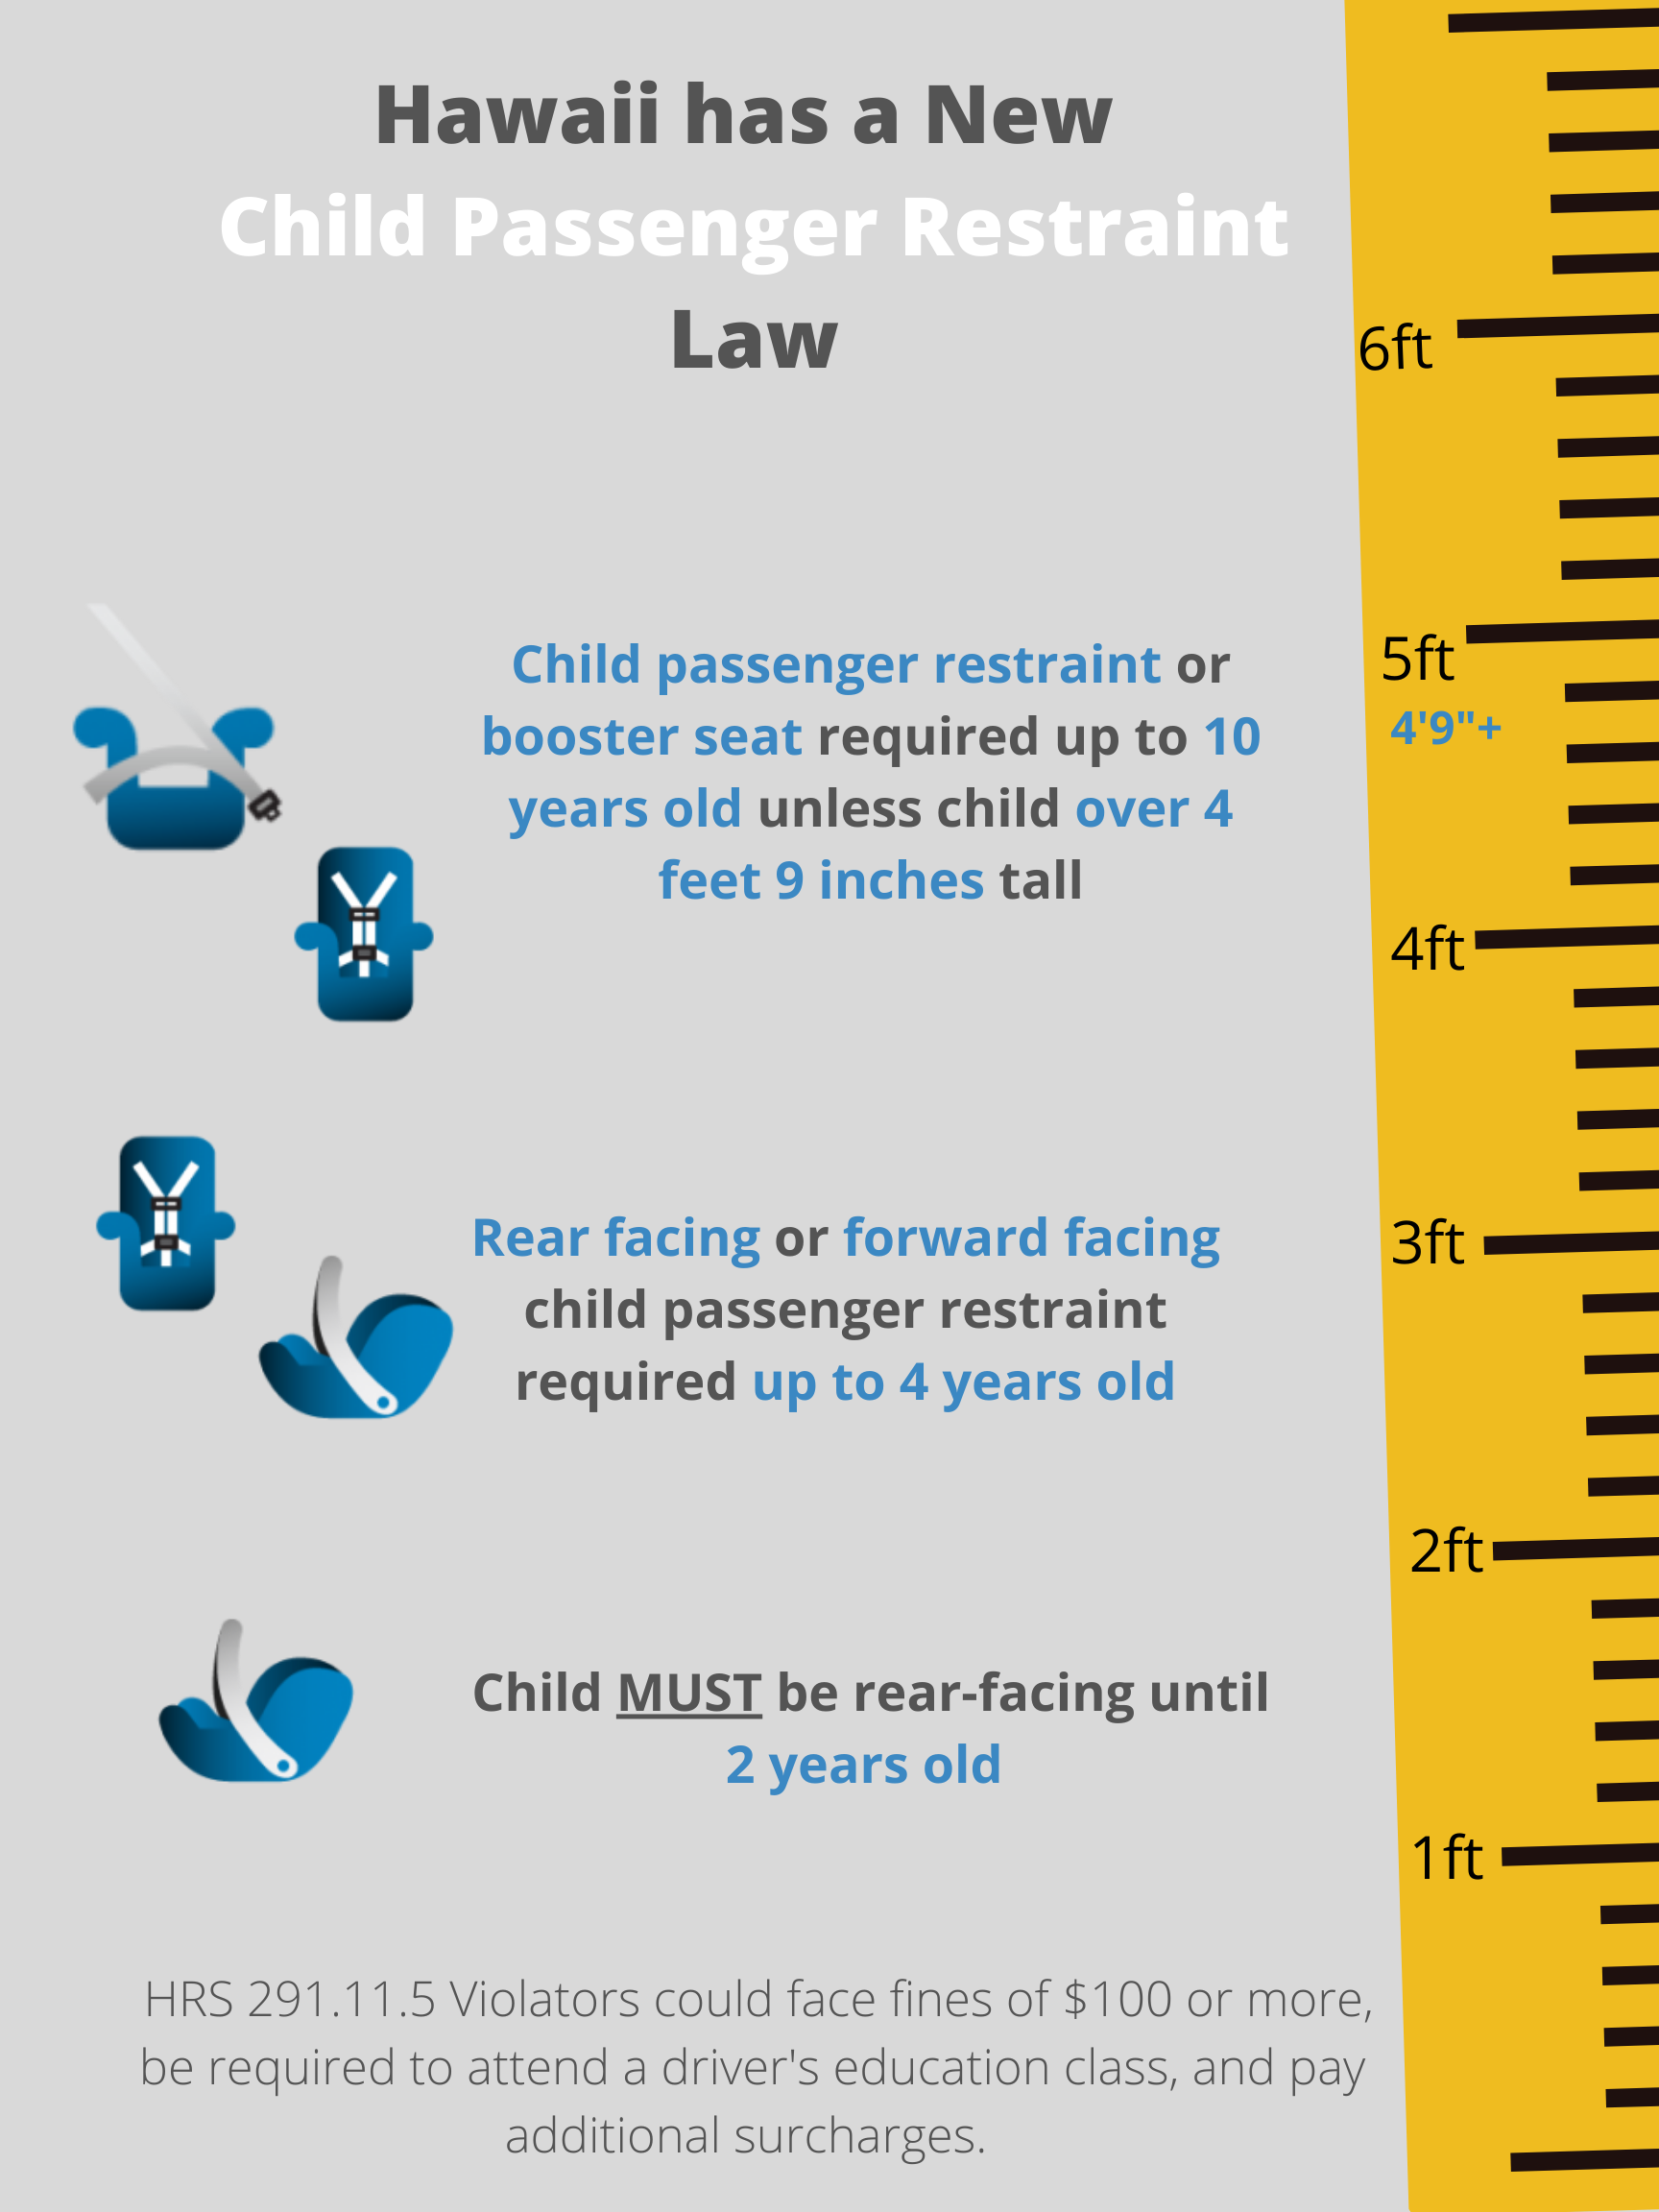 Putting Kids Back In Their Place: Car Seat Usage on Okinawa